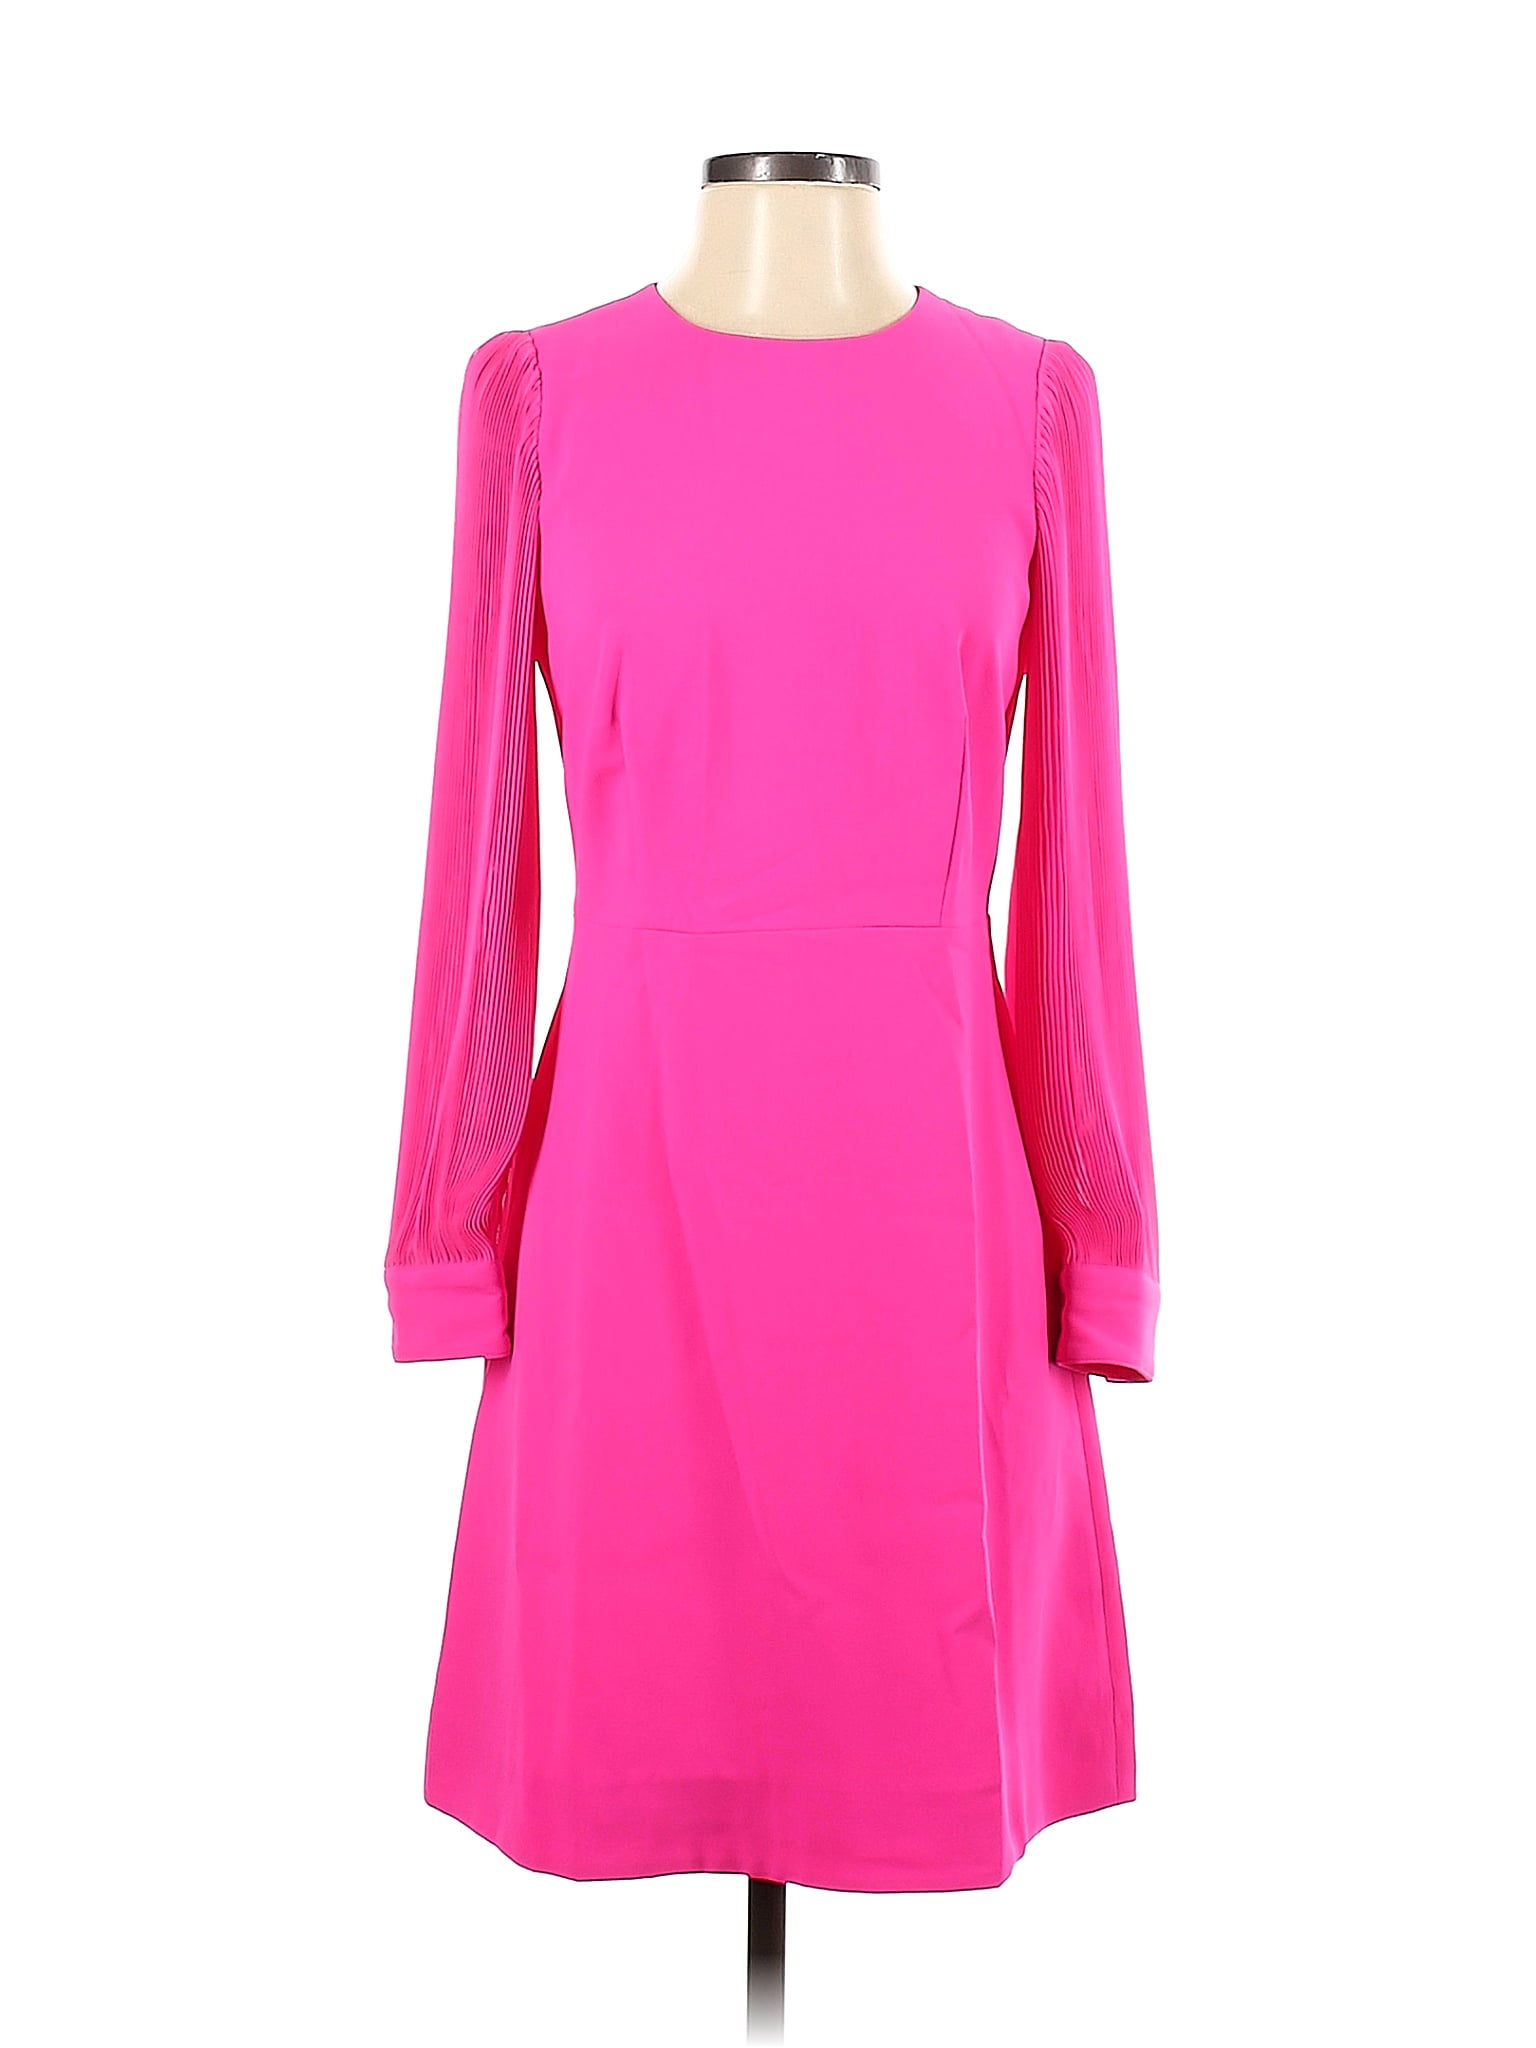 J.Crew 100% Polyester Pink Casual Dress Size 0 - 70% off | thredUP